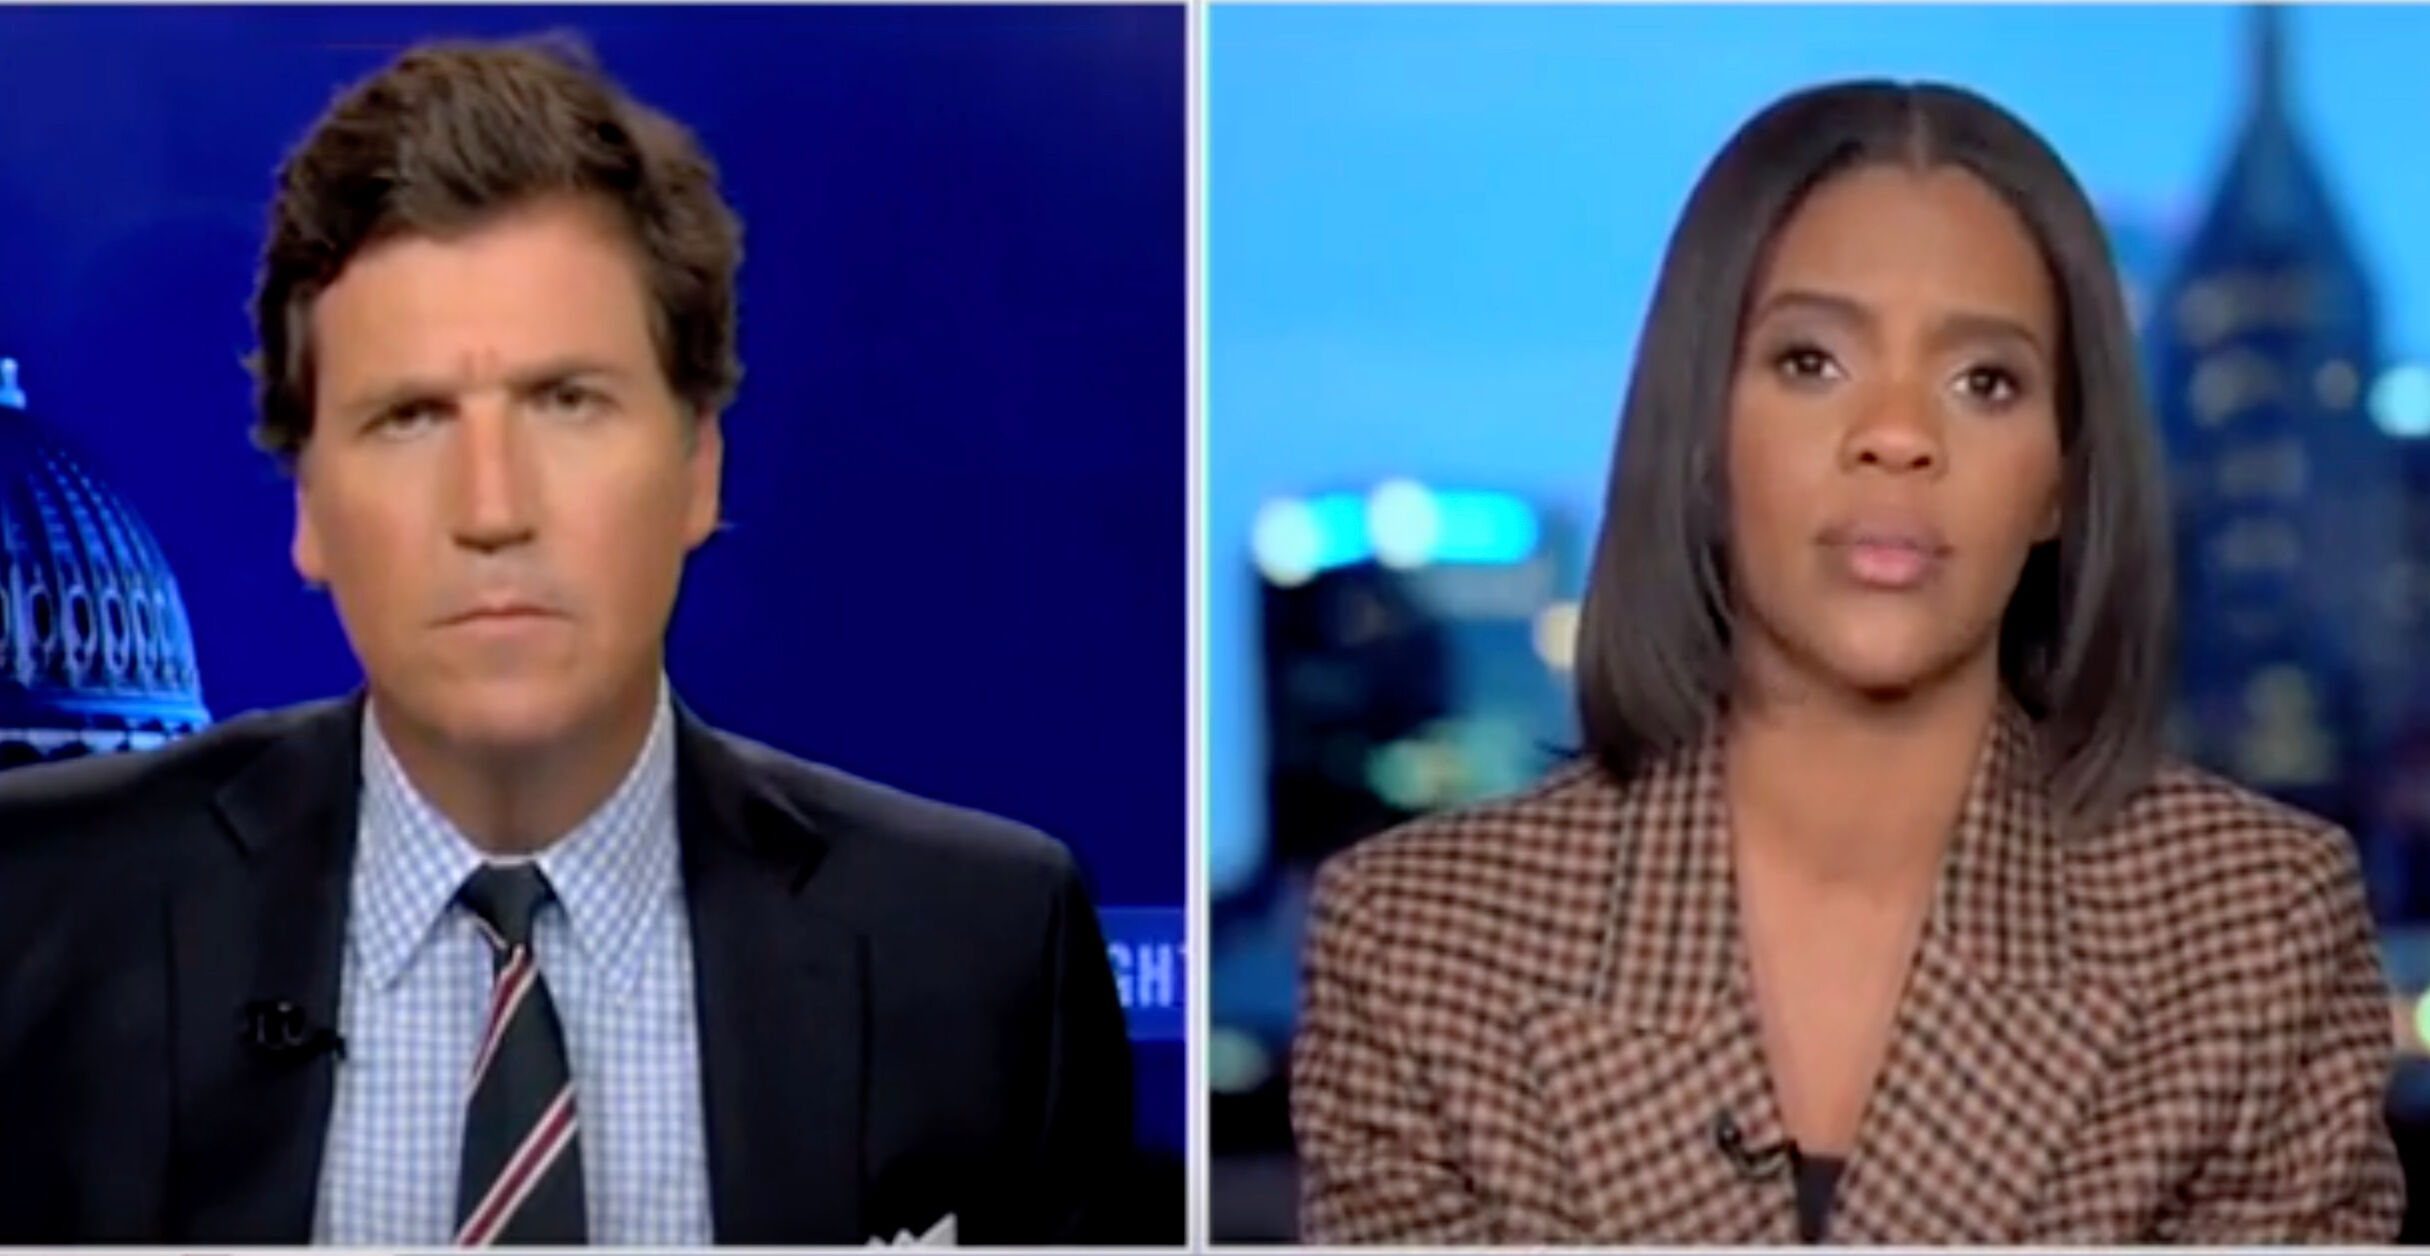 Tucker Carlson and Candace Owens